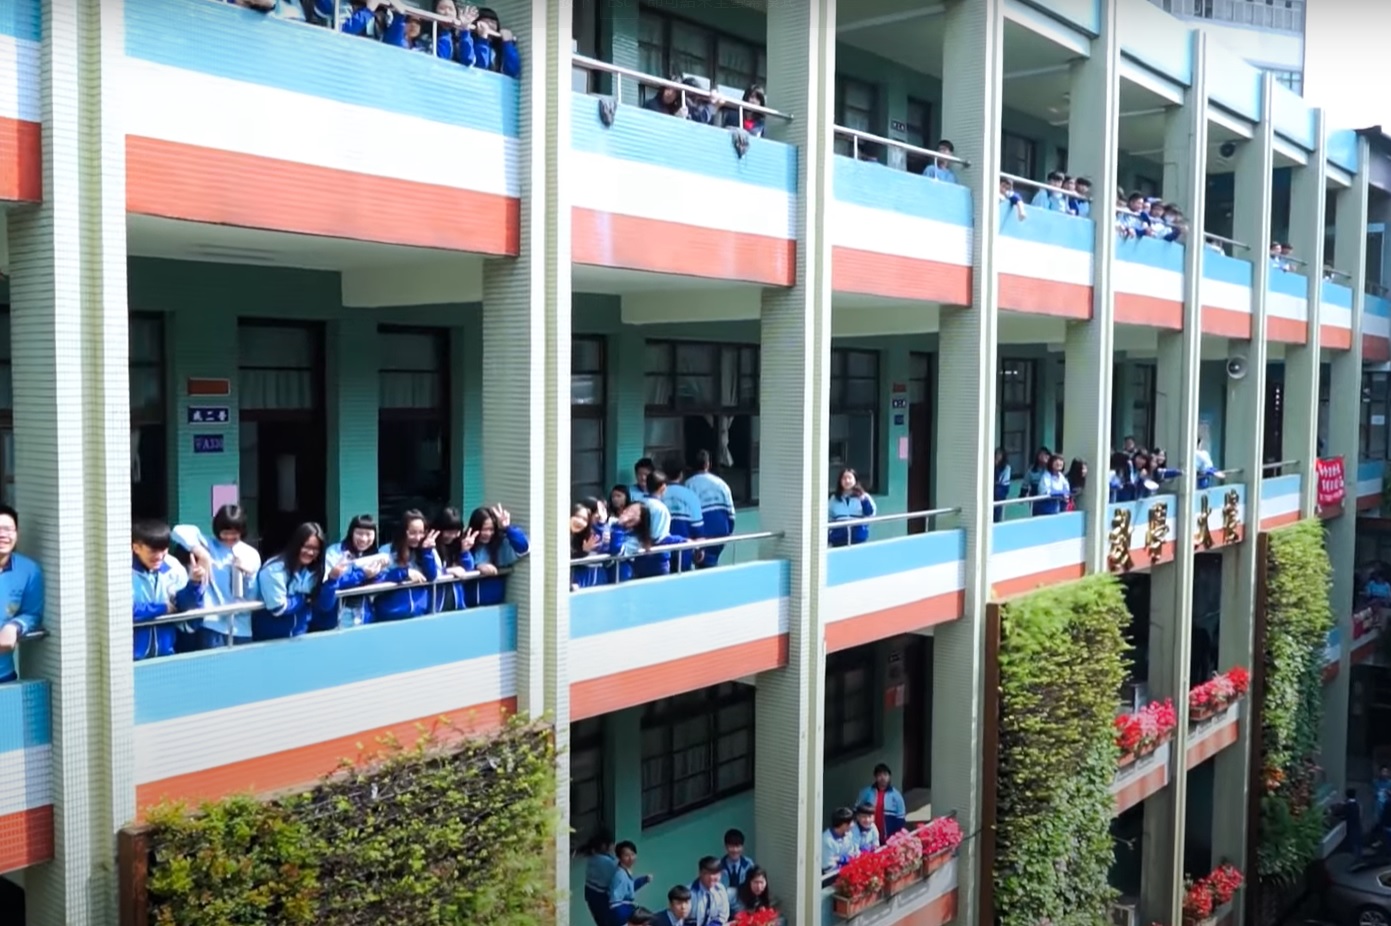 Teaching English and Living in Taiwan Jobs Available 教學工作, St. Francis Xavier Senior High School Private Catholic Senior School Offers PERFECT Full-time Position! Up to NT$80,000+ / Month! Combined Junior and Senior High School on Big Leafy Green Campus in the Heart of the City! image